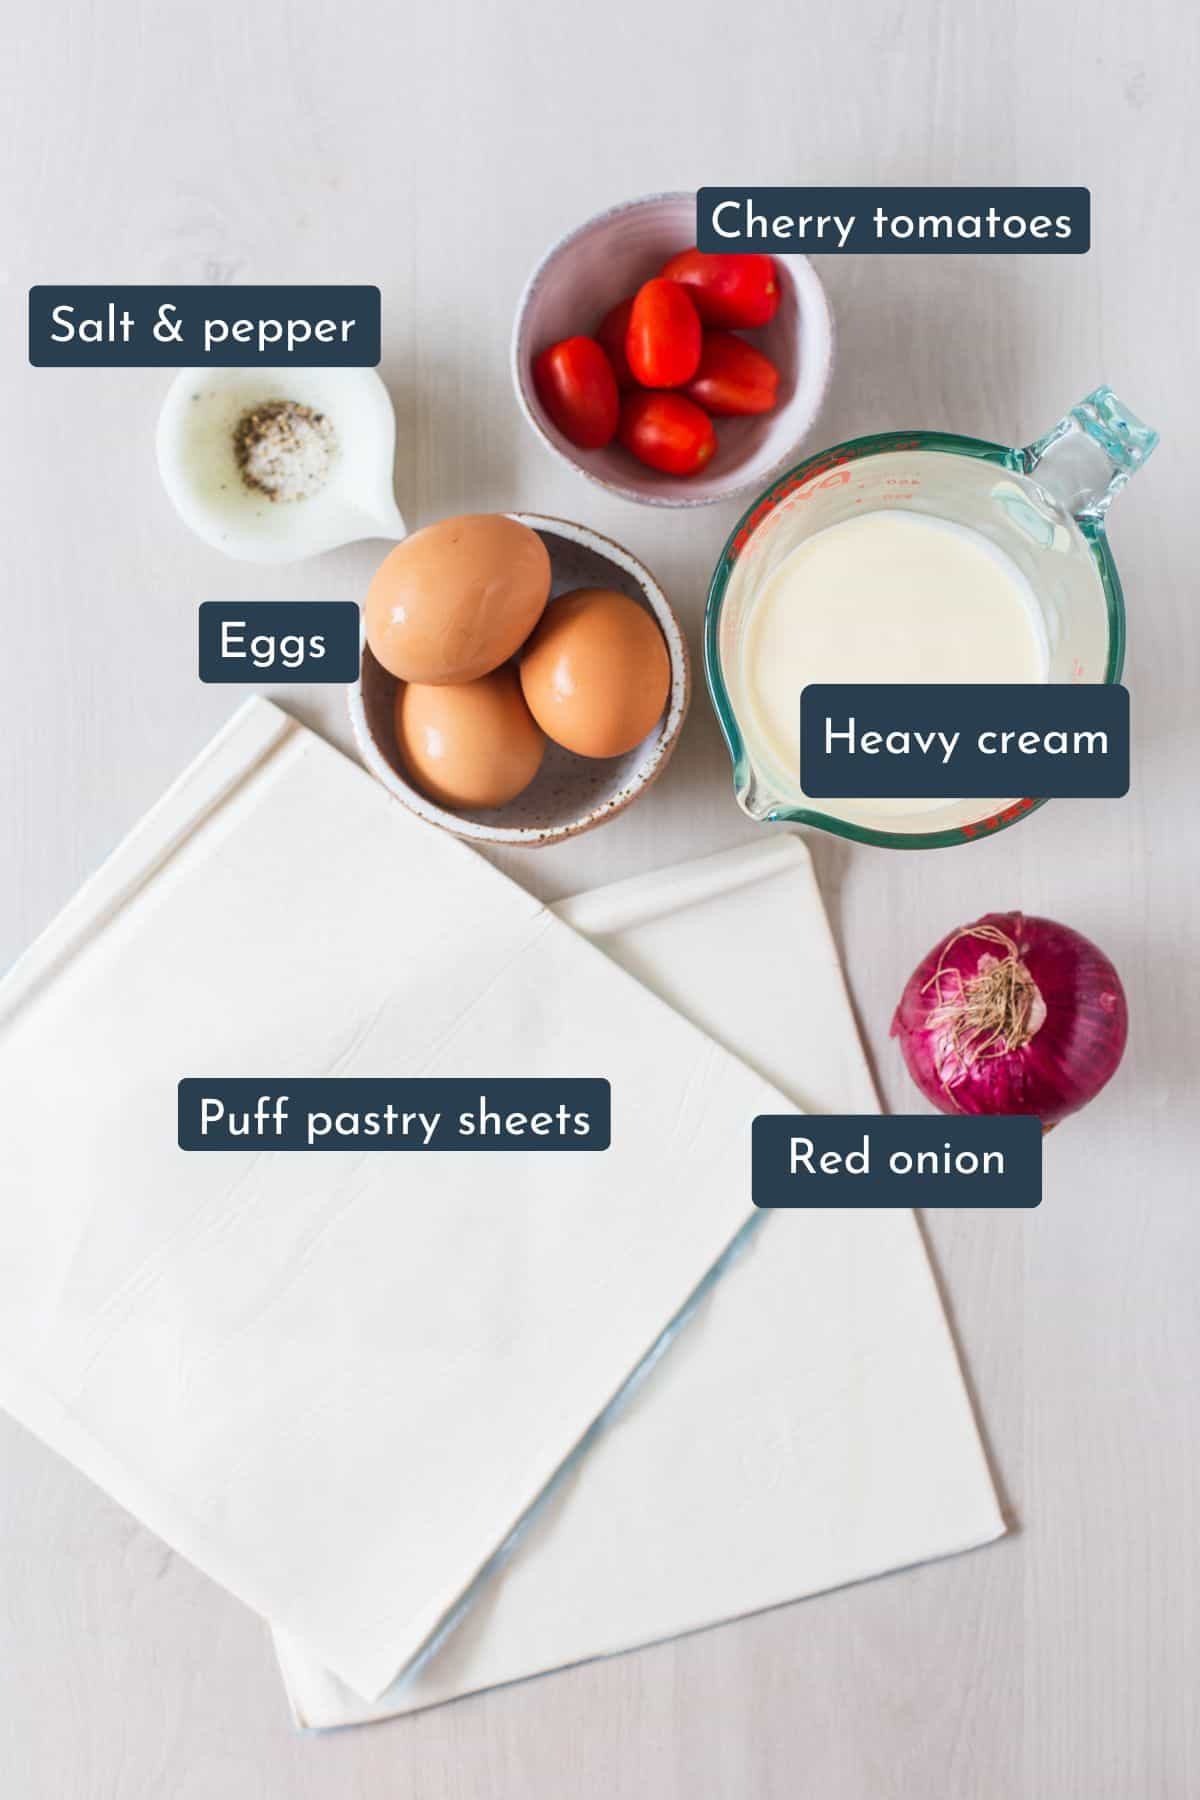 Individual ingredients laid out to make puff pastry quiches are puff pastry sheets, red onion, eggs, heavy cream, cherry tomatoes, salt and pepper.